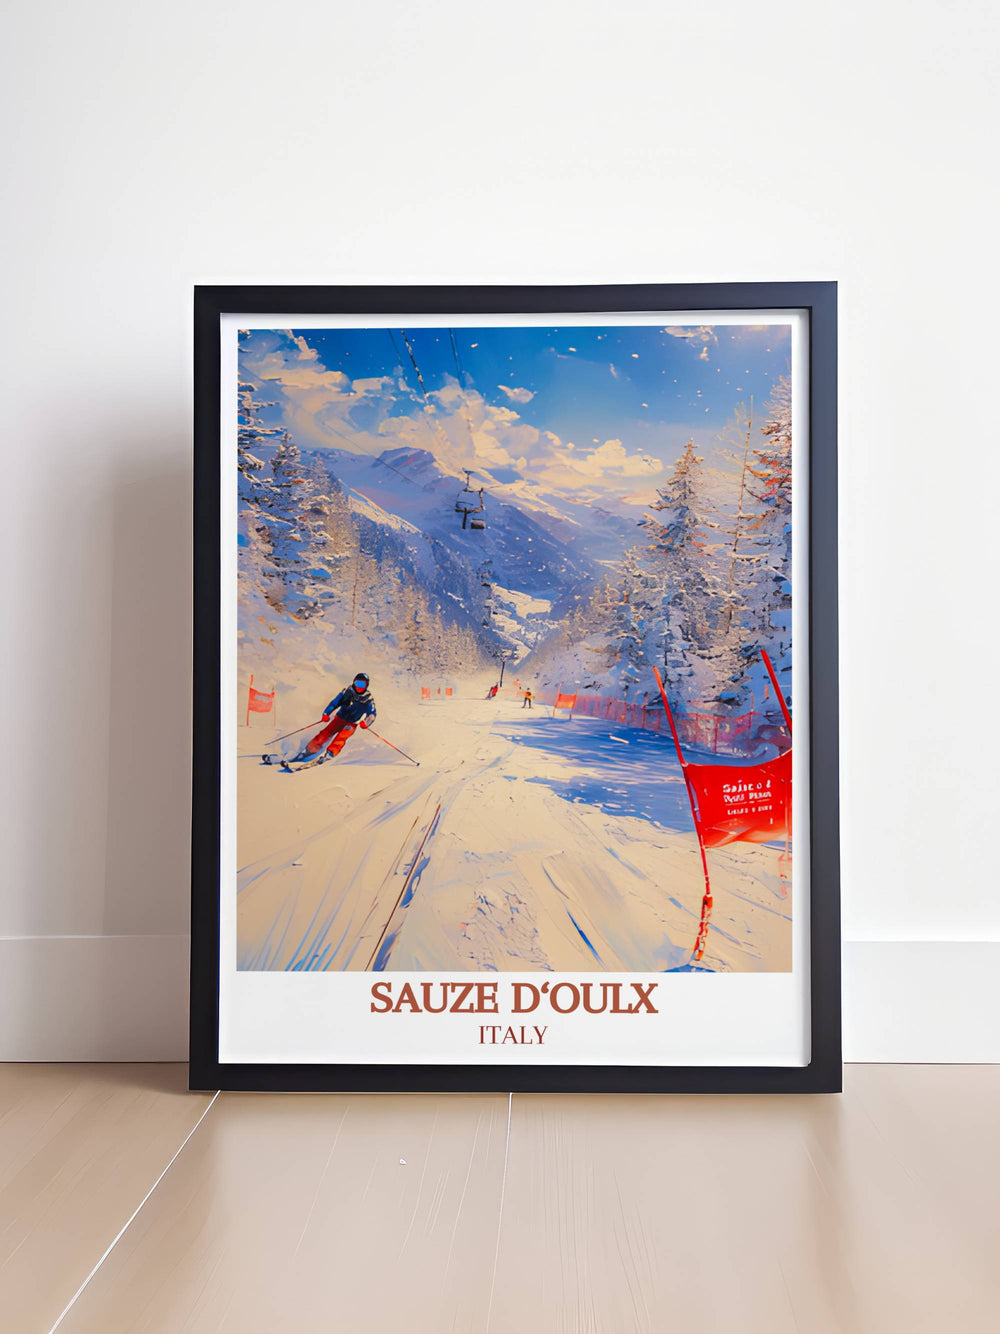 Experience the elegance of Sauze dOulx with our Ski Resort Home Decor collection, showcasing picturesque views and luxurious amenities in stunning detail.